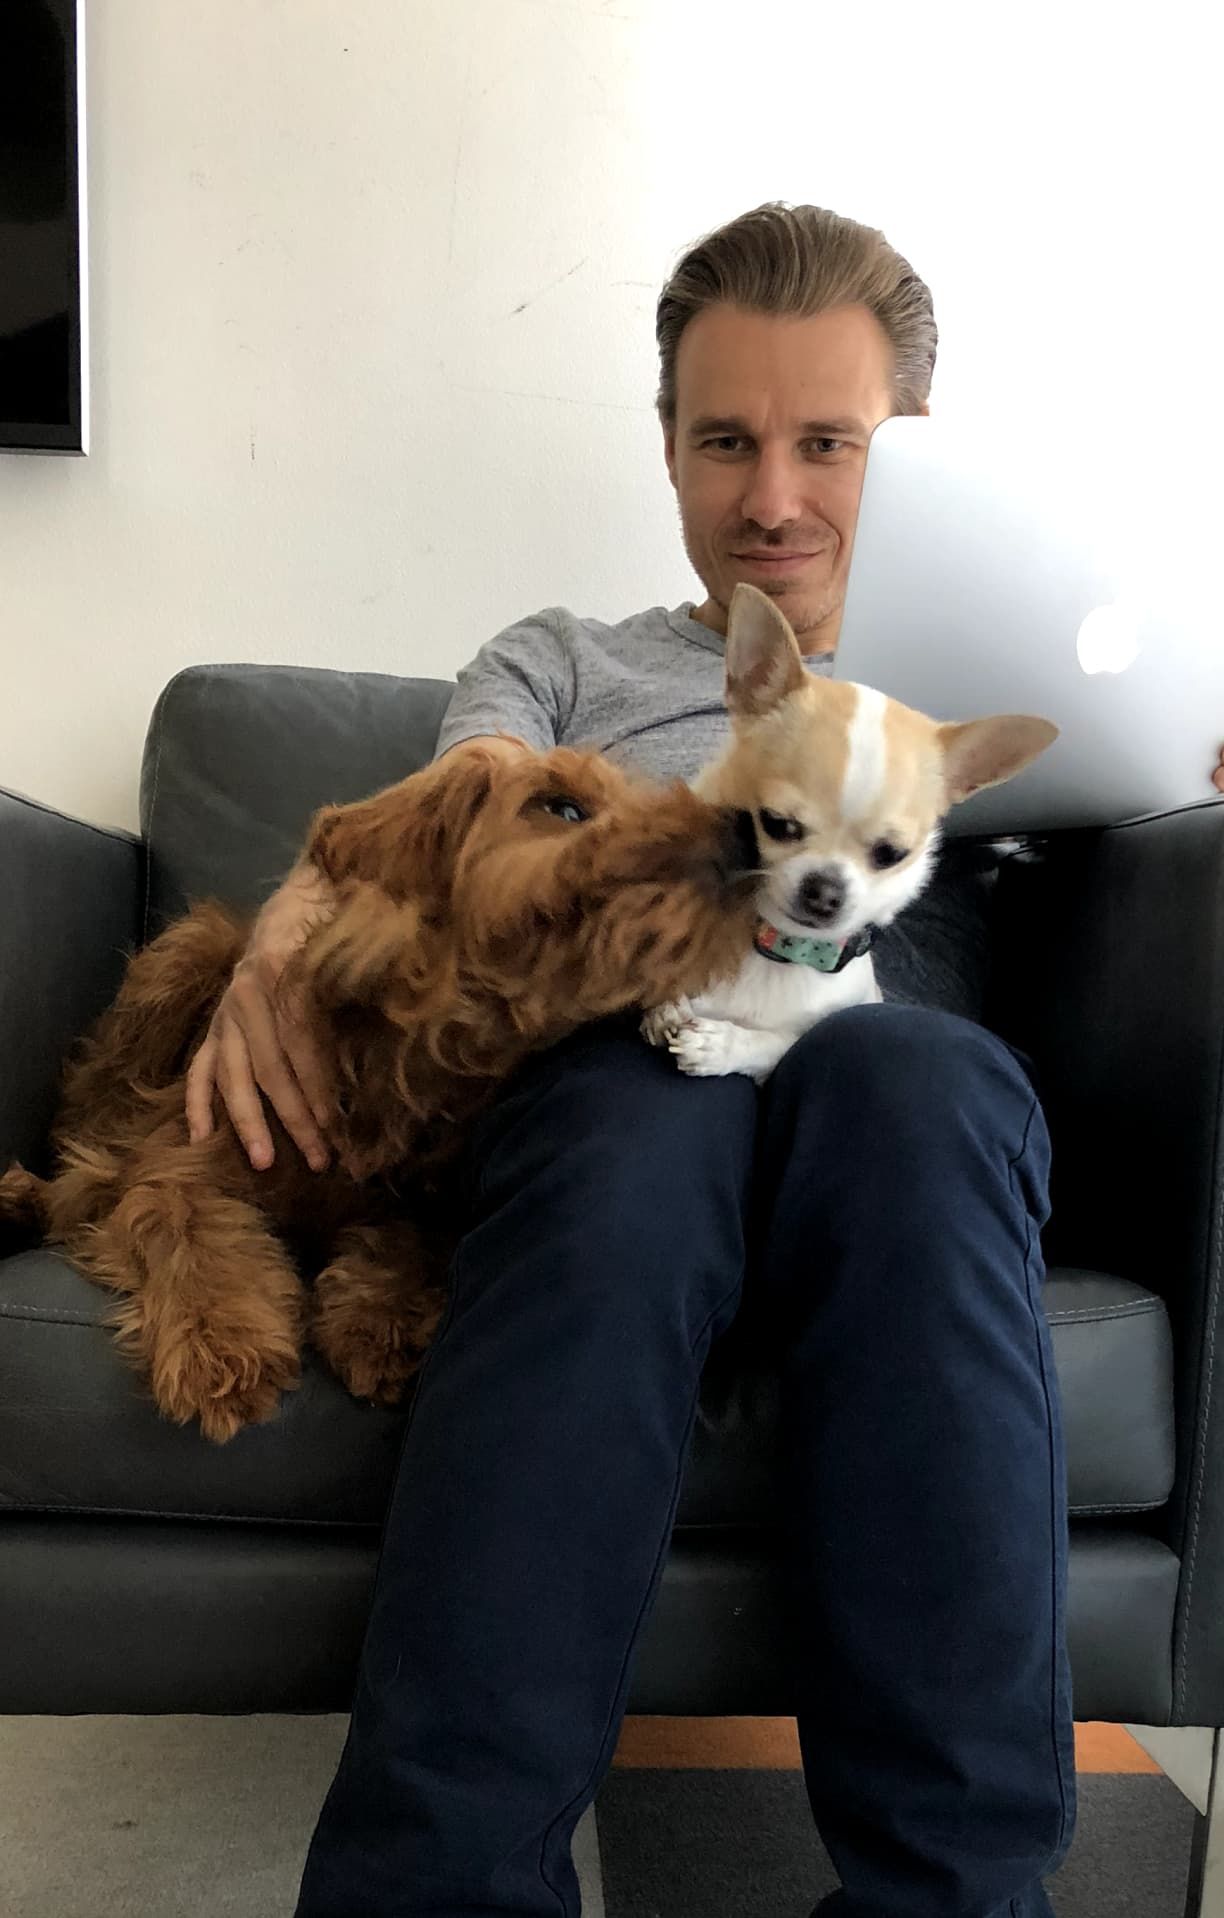 Ariel Ratajczak on an armchair with two dogs, their dog Nuki, and our office dog Chai.